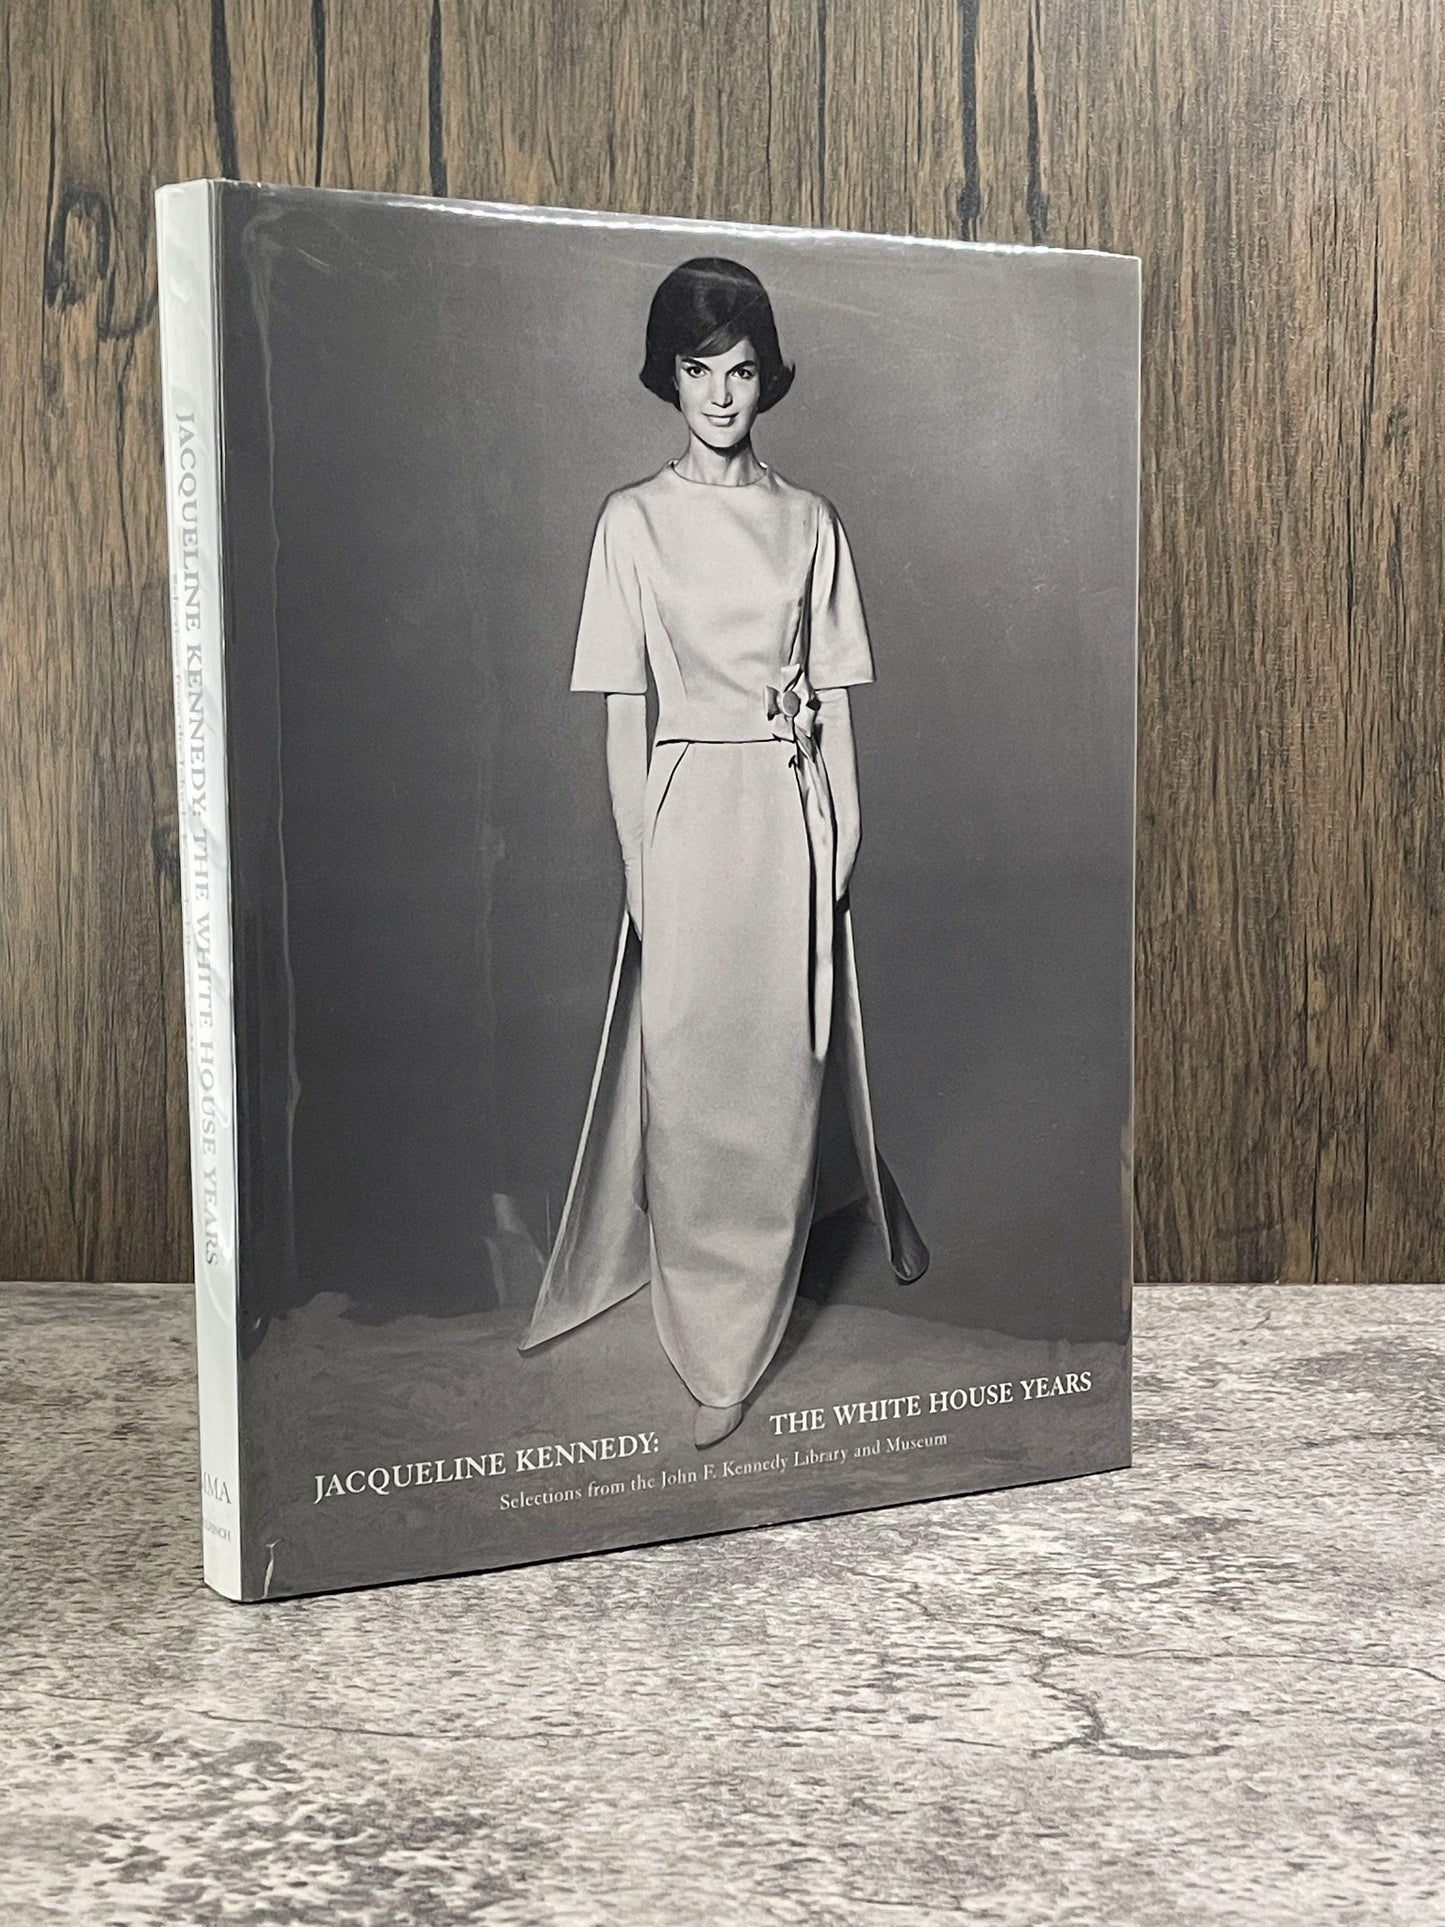 Jacqueline Kennedy / The White House Years / First Edition / 2001 - Precious Cache